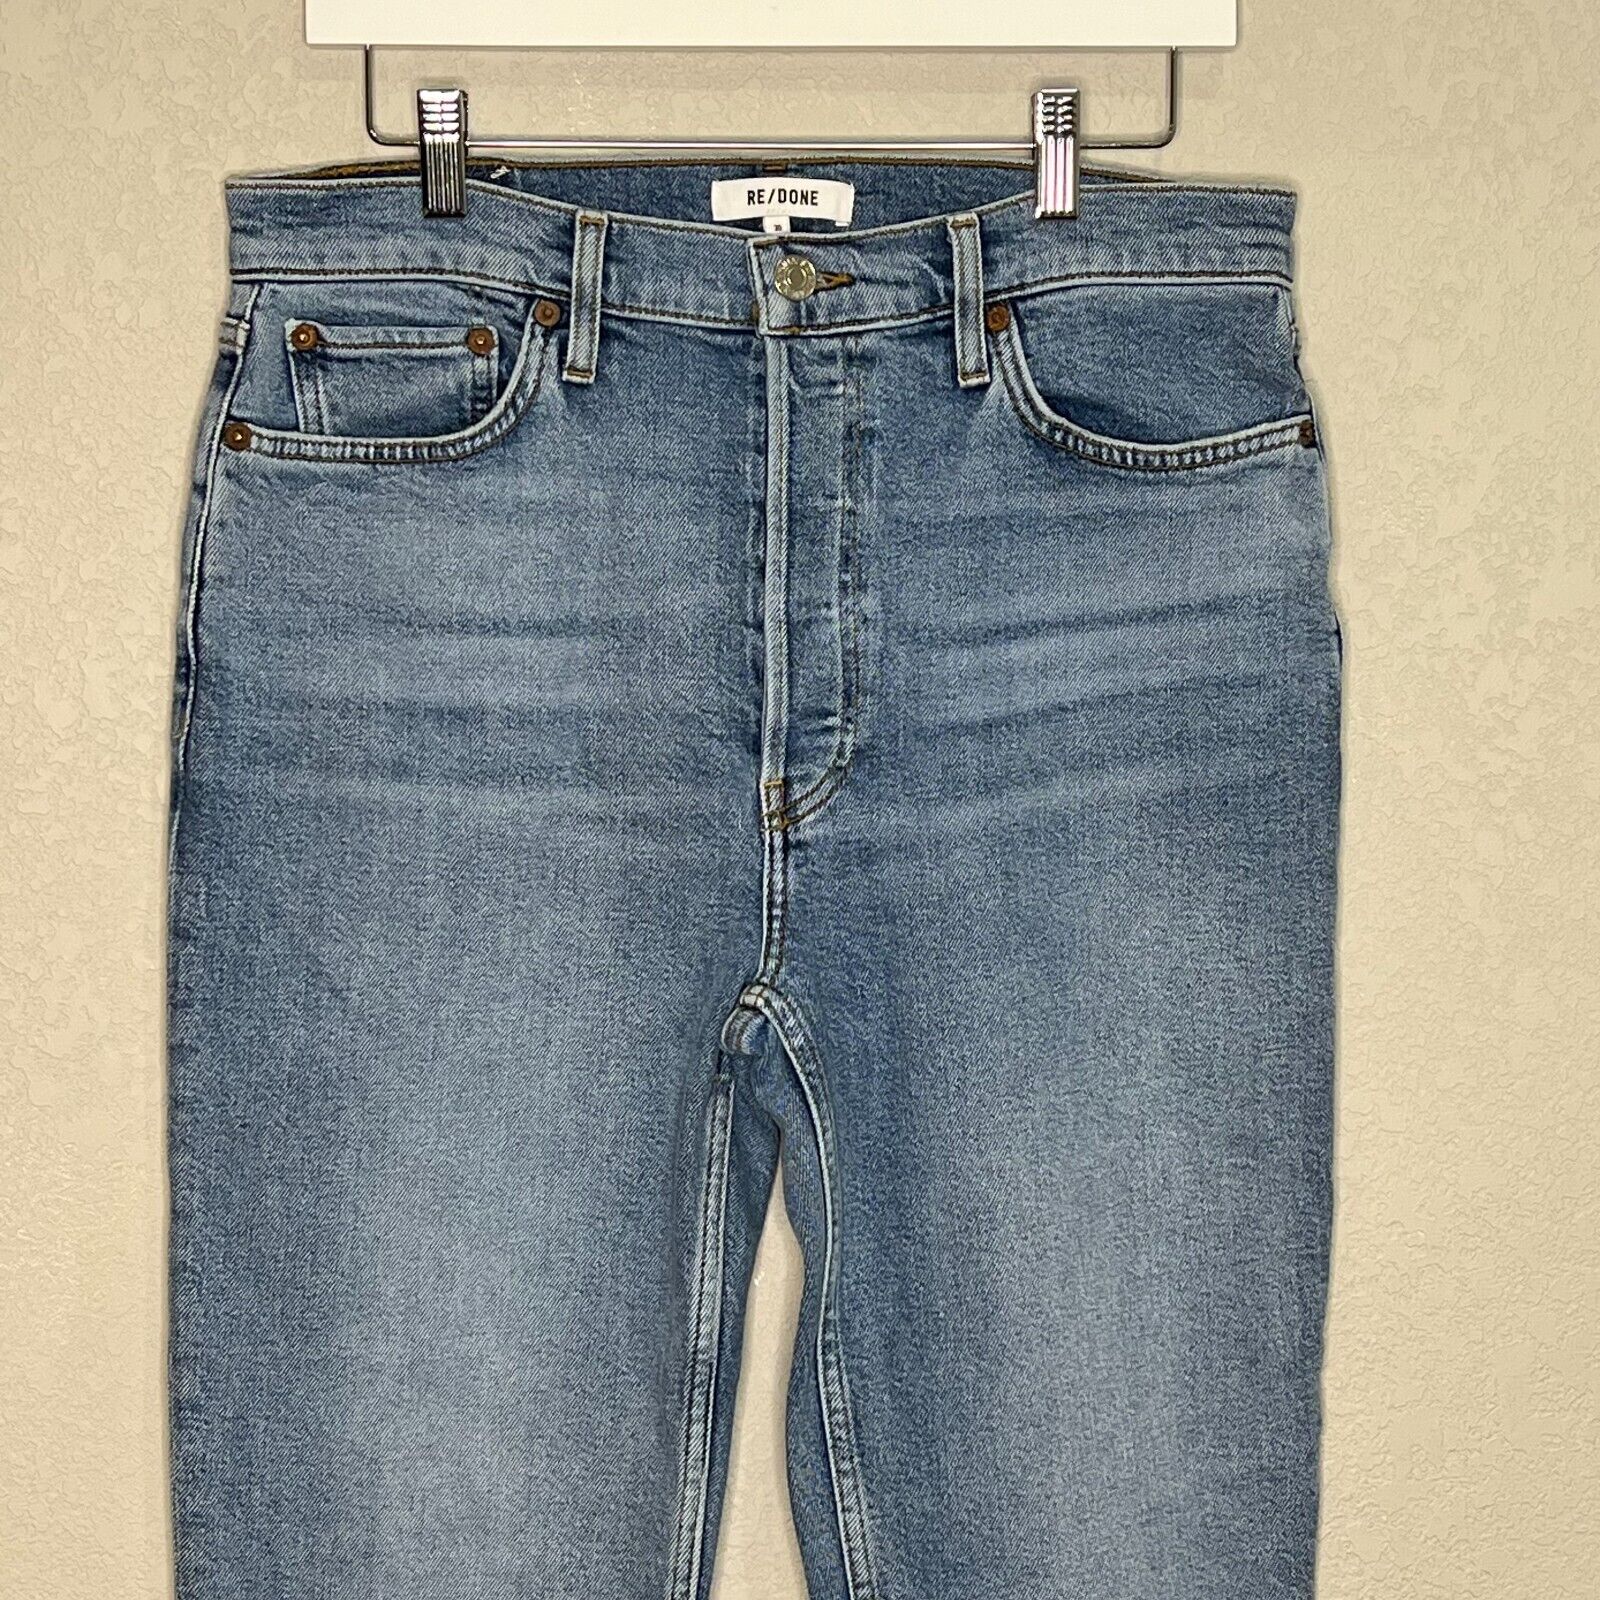 RE/DONE 90s High Rise Ankle Cropped Blue Jeans Sz 30 NEW $265